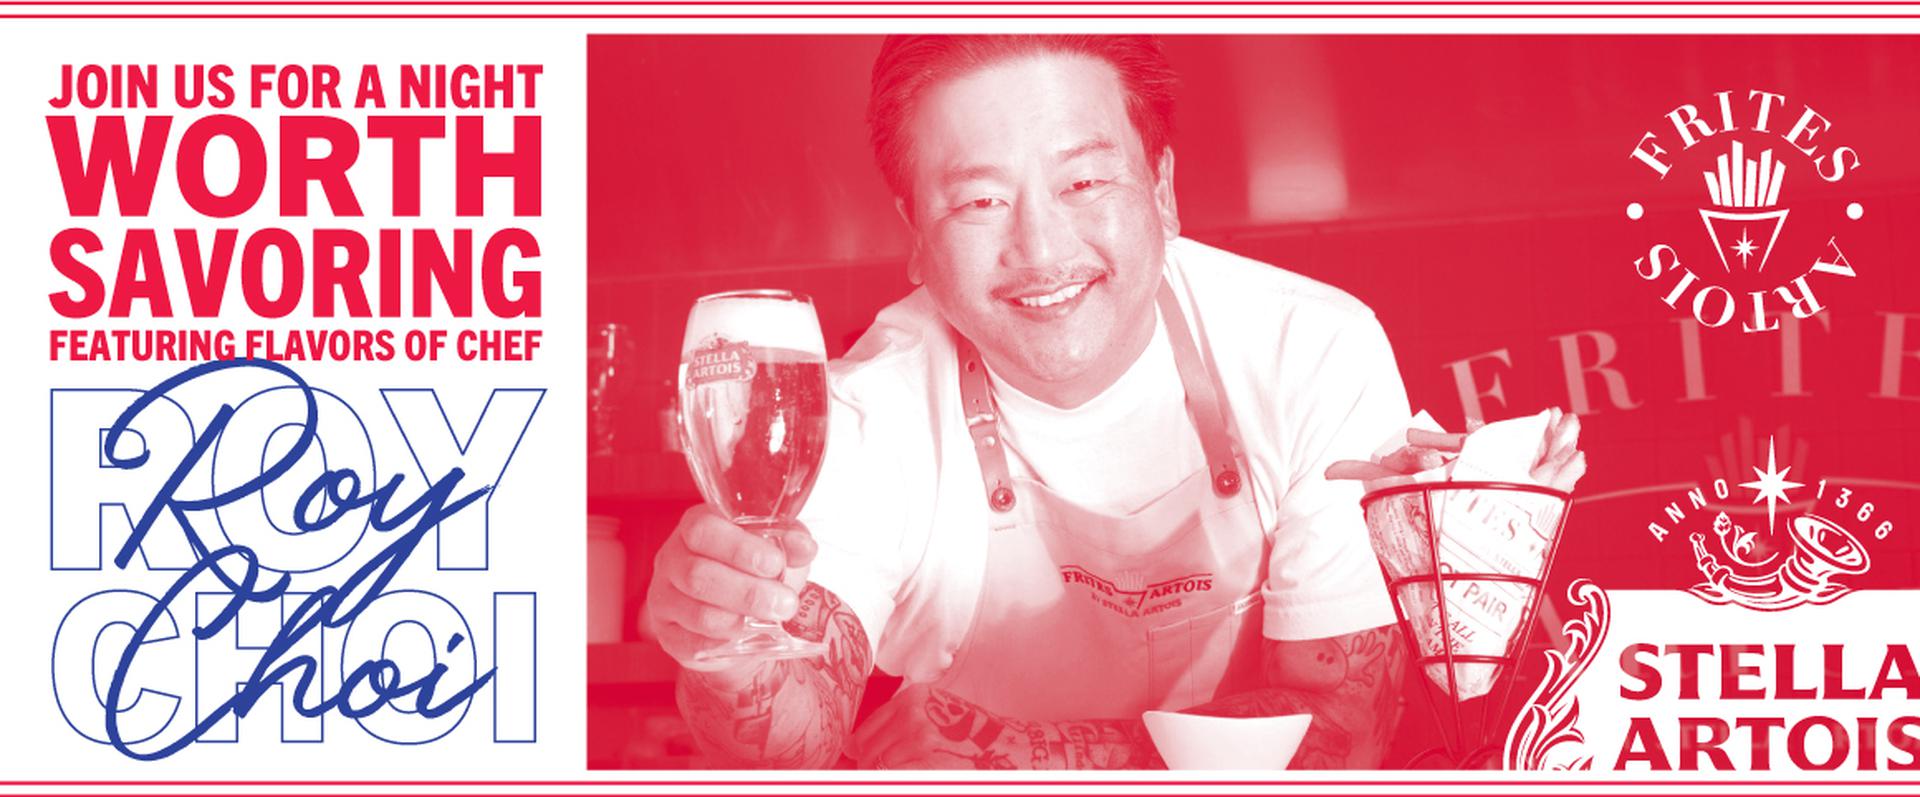 Stella Artois and Chef Roy Choi Introduce “Frites Artois”, a Savory Celebration of the Beloved French Fry